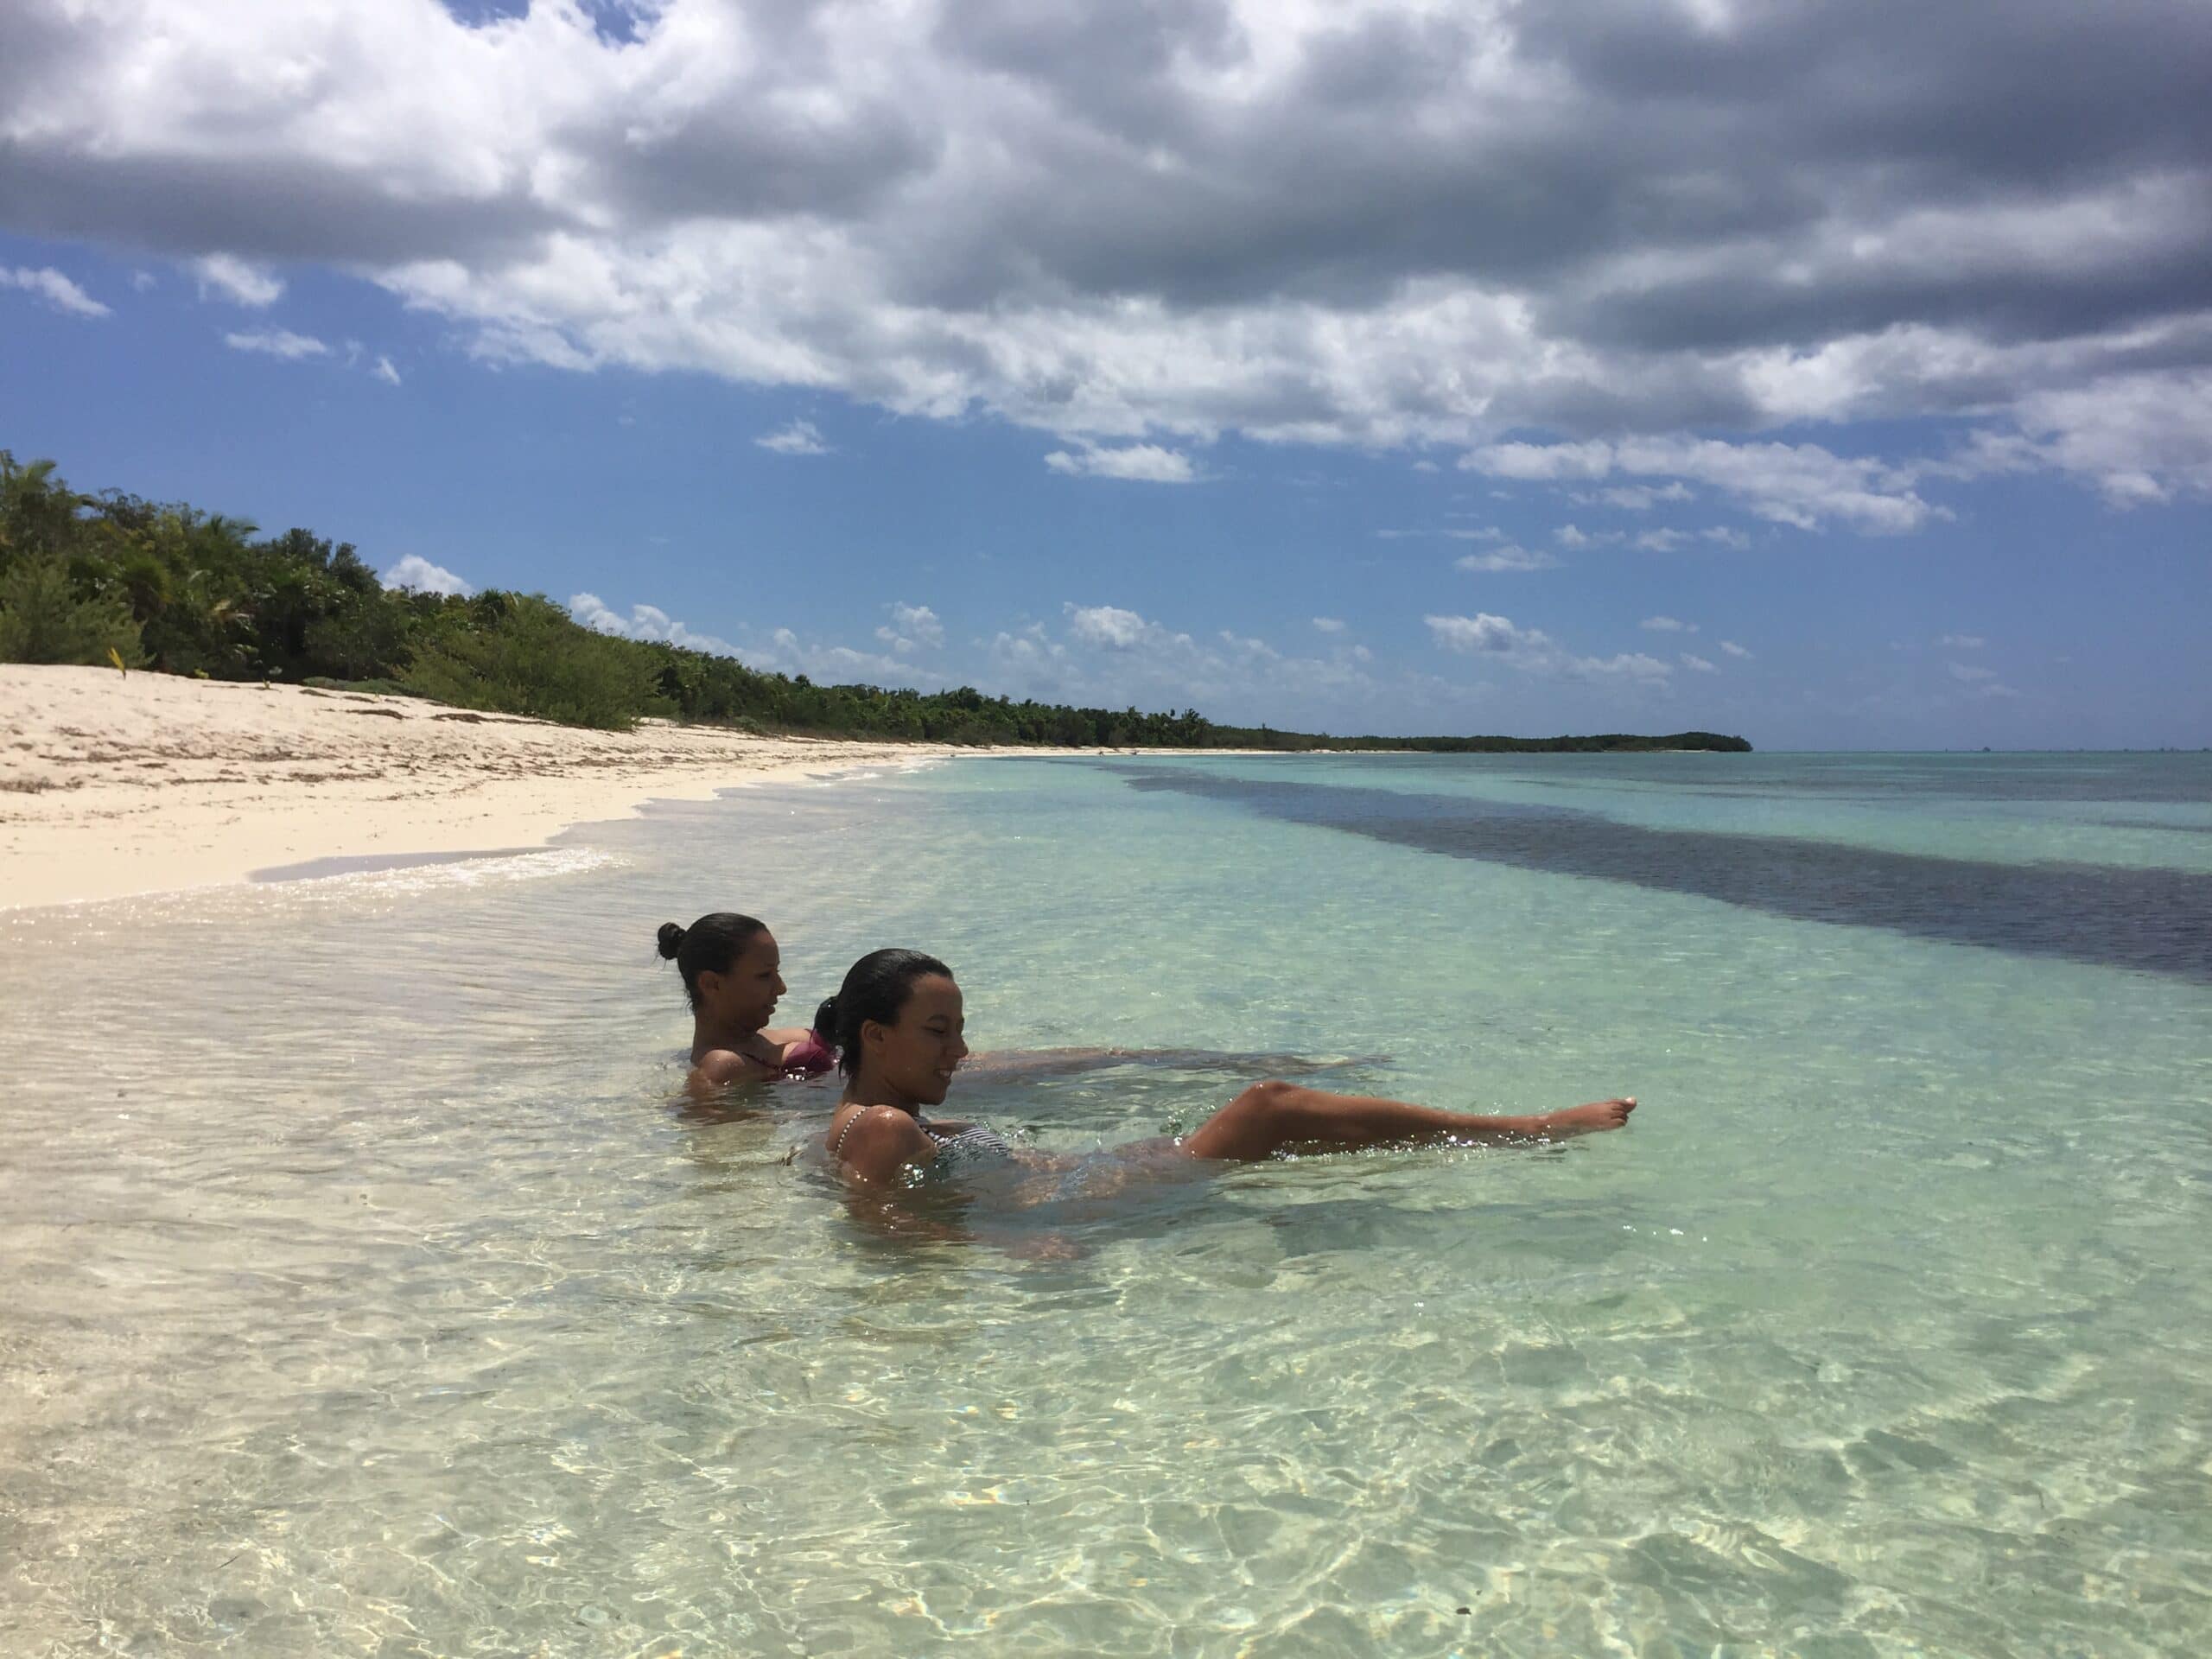 Two female private snorkelers relax in very shallow water for a break during their private snorkeling day.